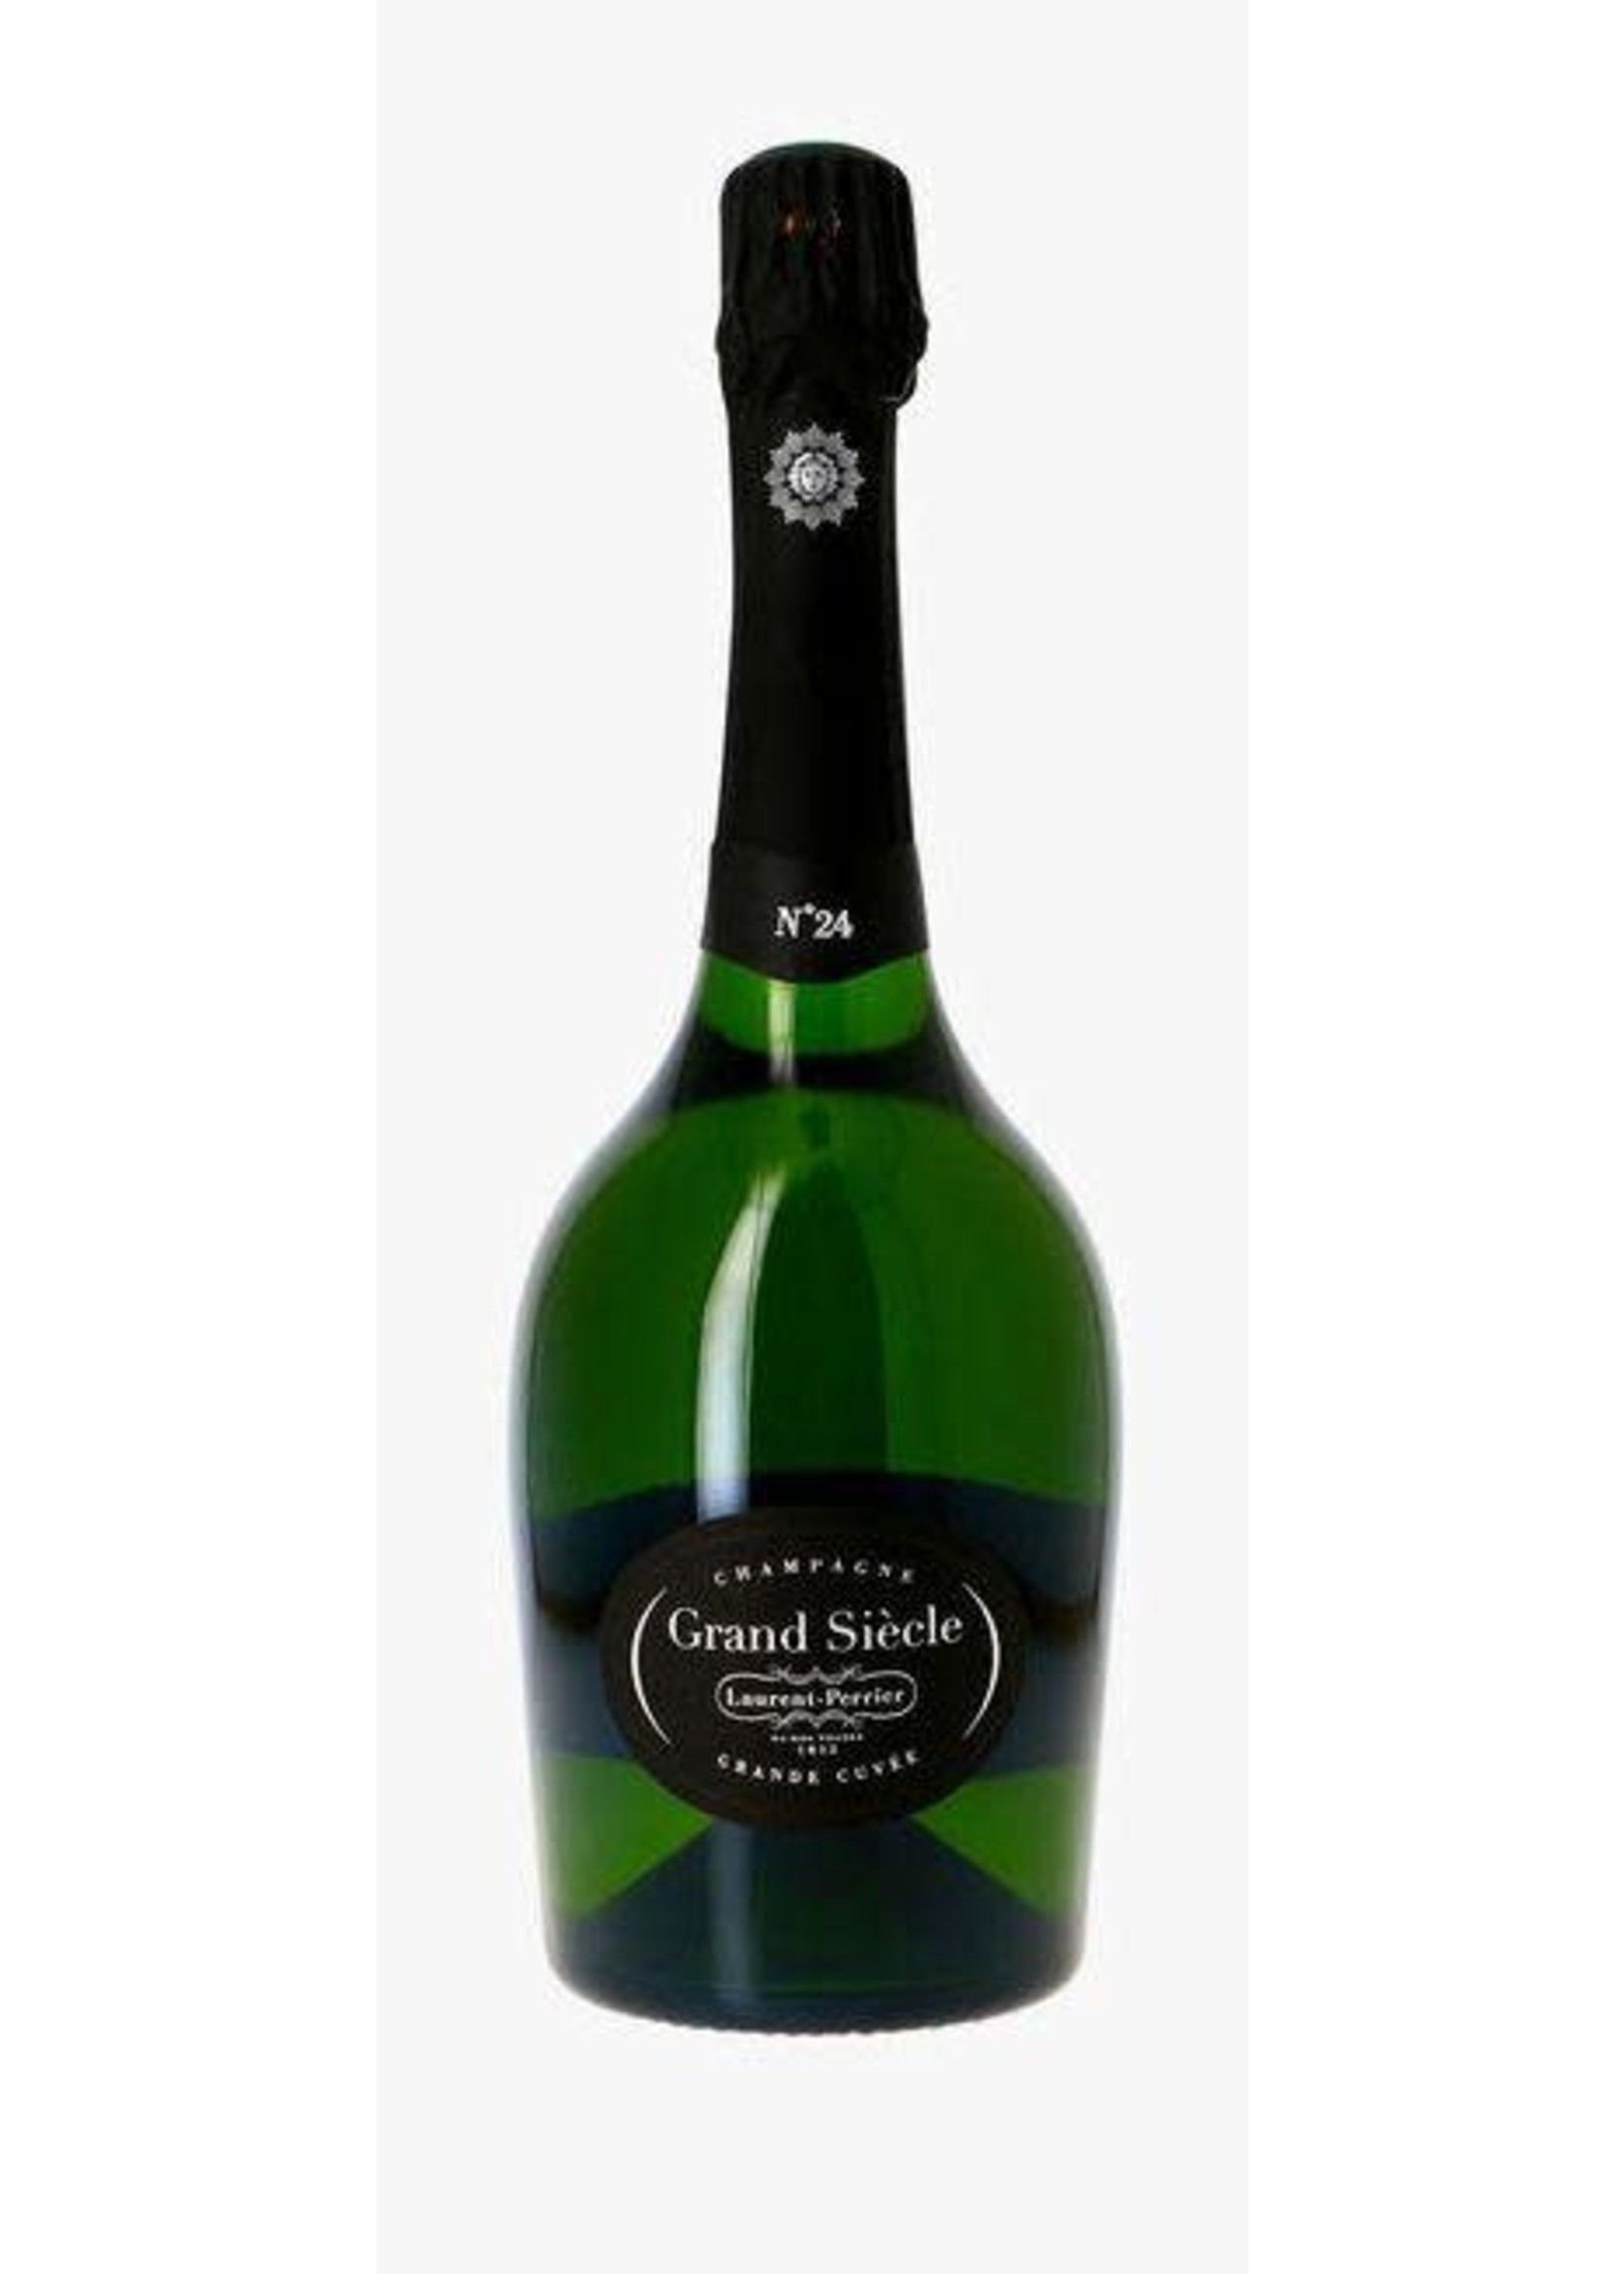 Laurent Perrier Champagne NV Grand Siecle No. 24 Brut 750ml